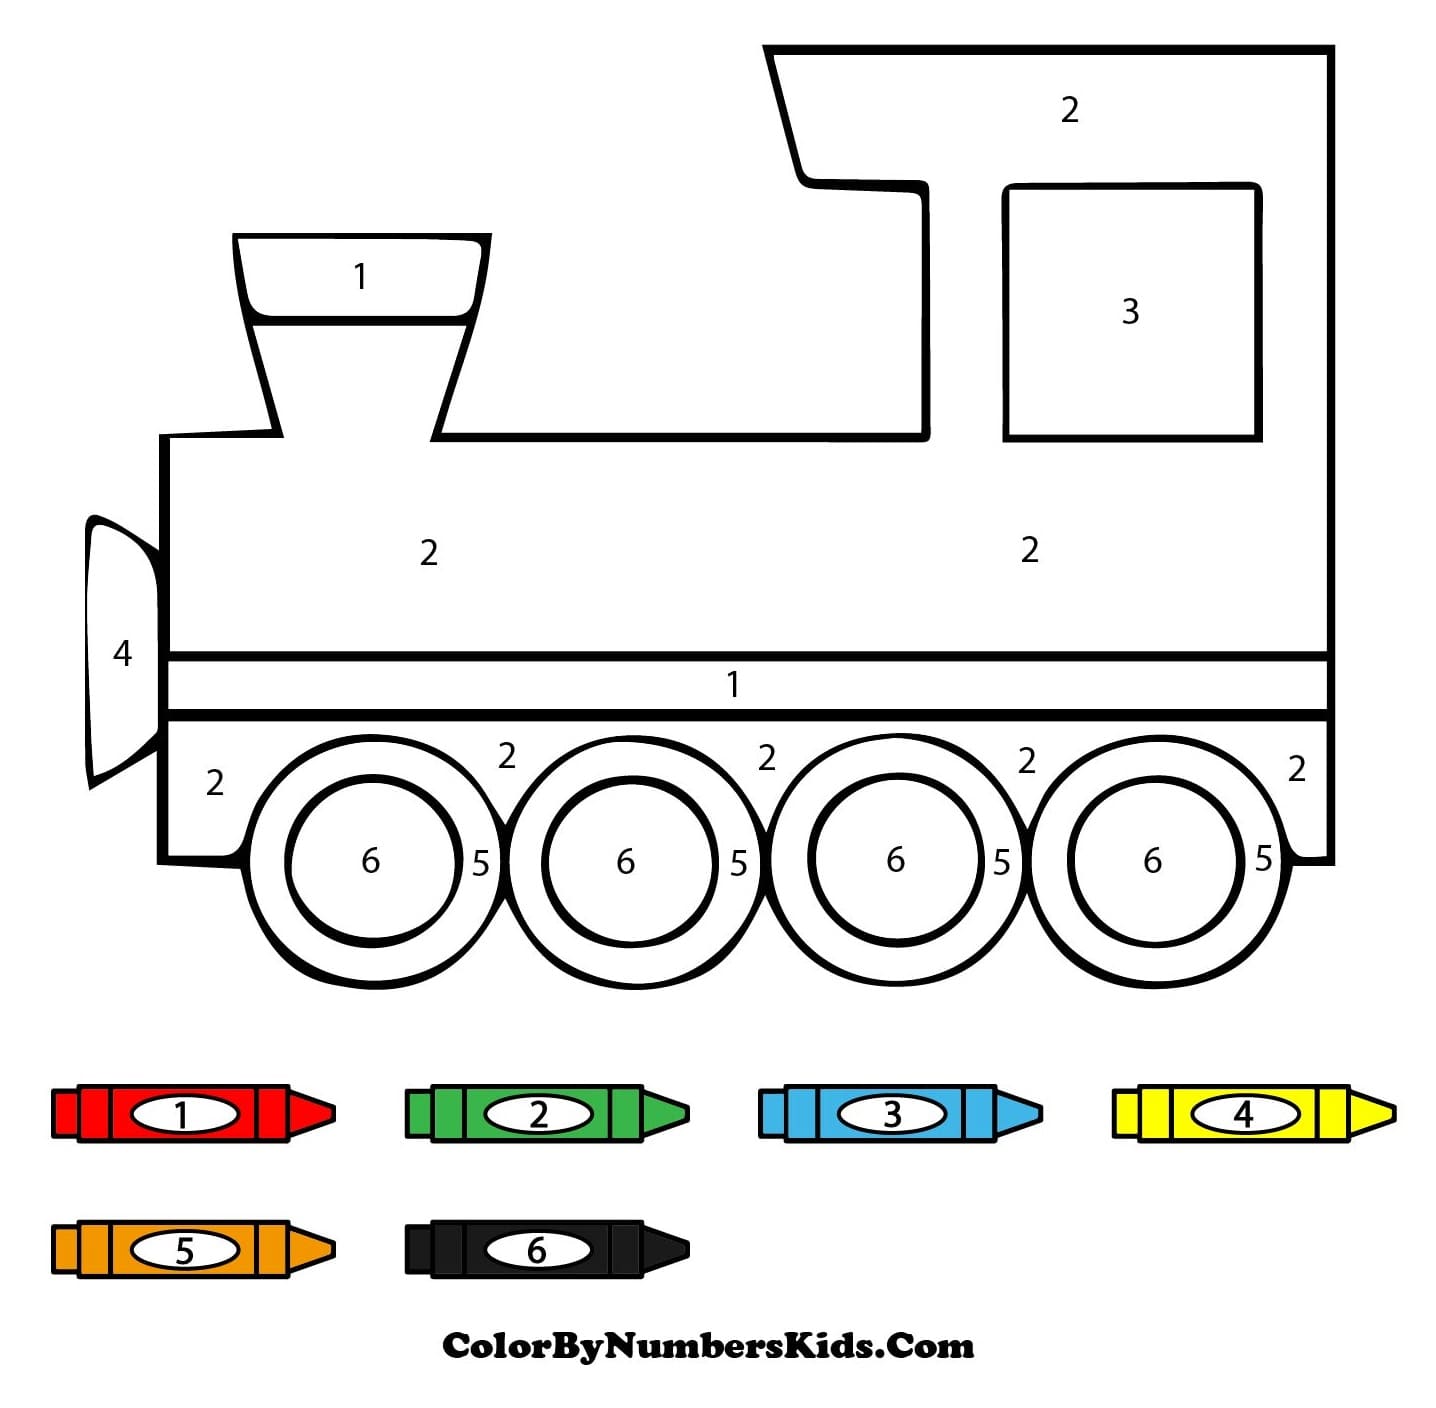 Cool Train Color By Number